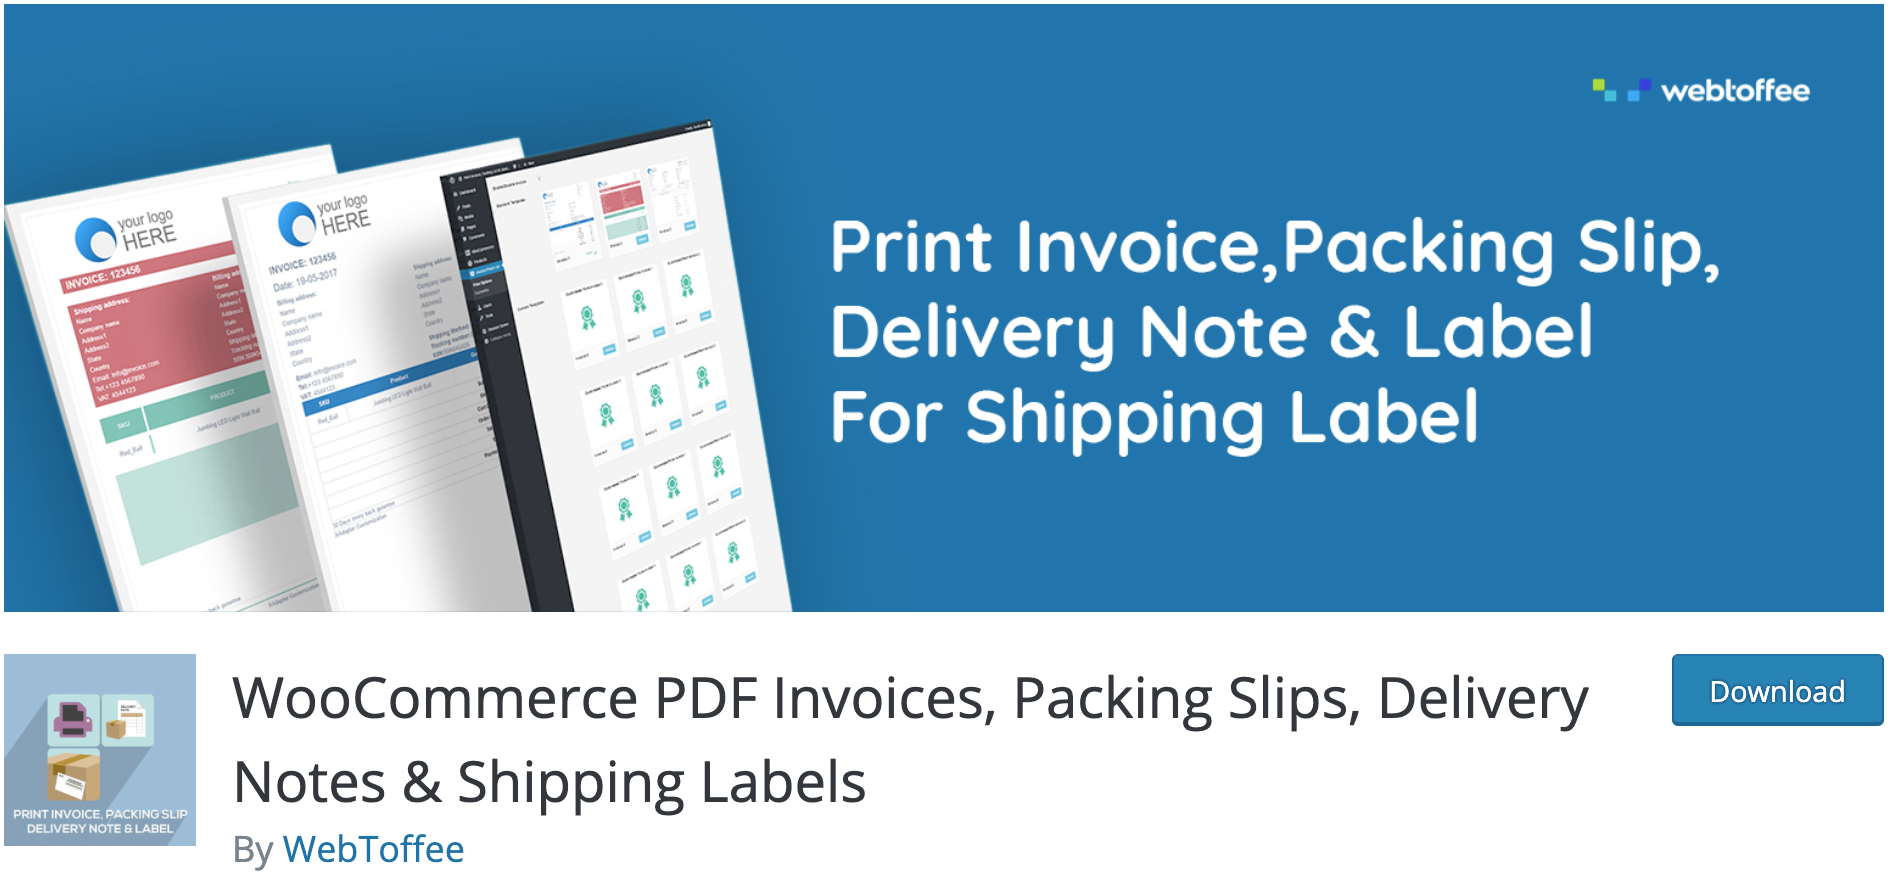 WooCommerce PDF Invoices, Packing Slips, Delivery Notes & Shipping Labels plugin on WordPress directory